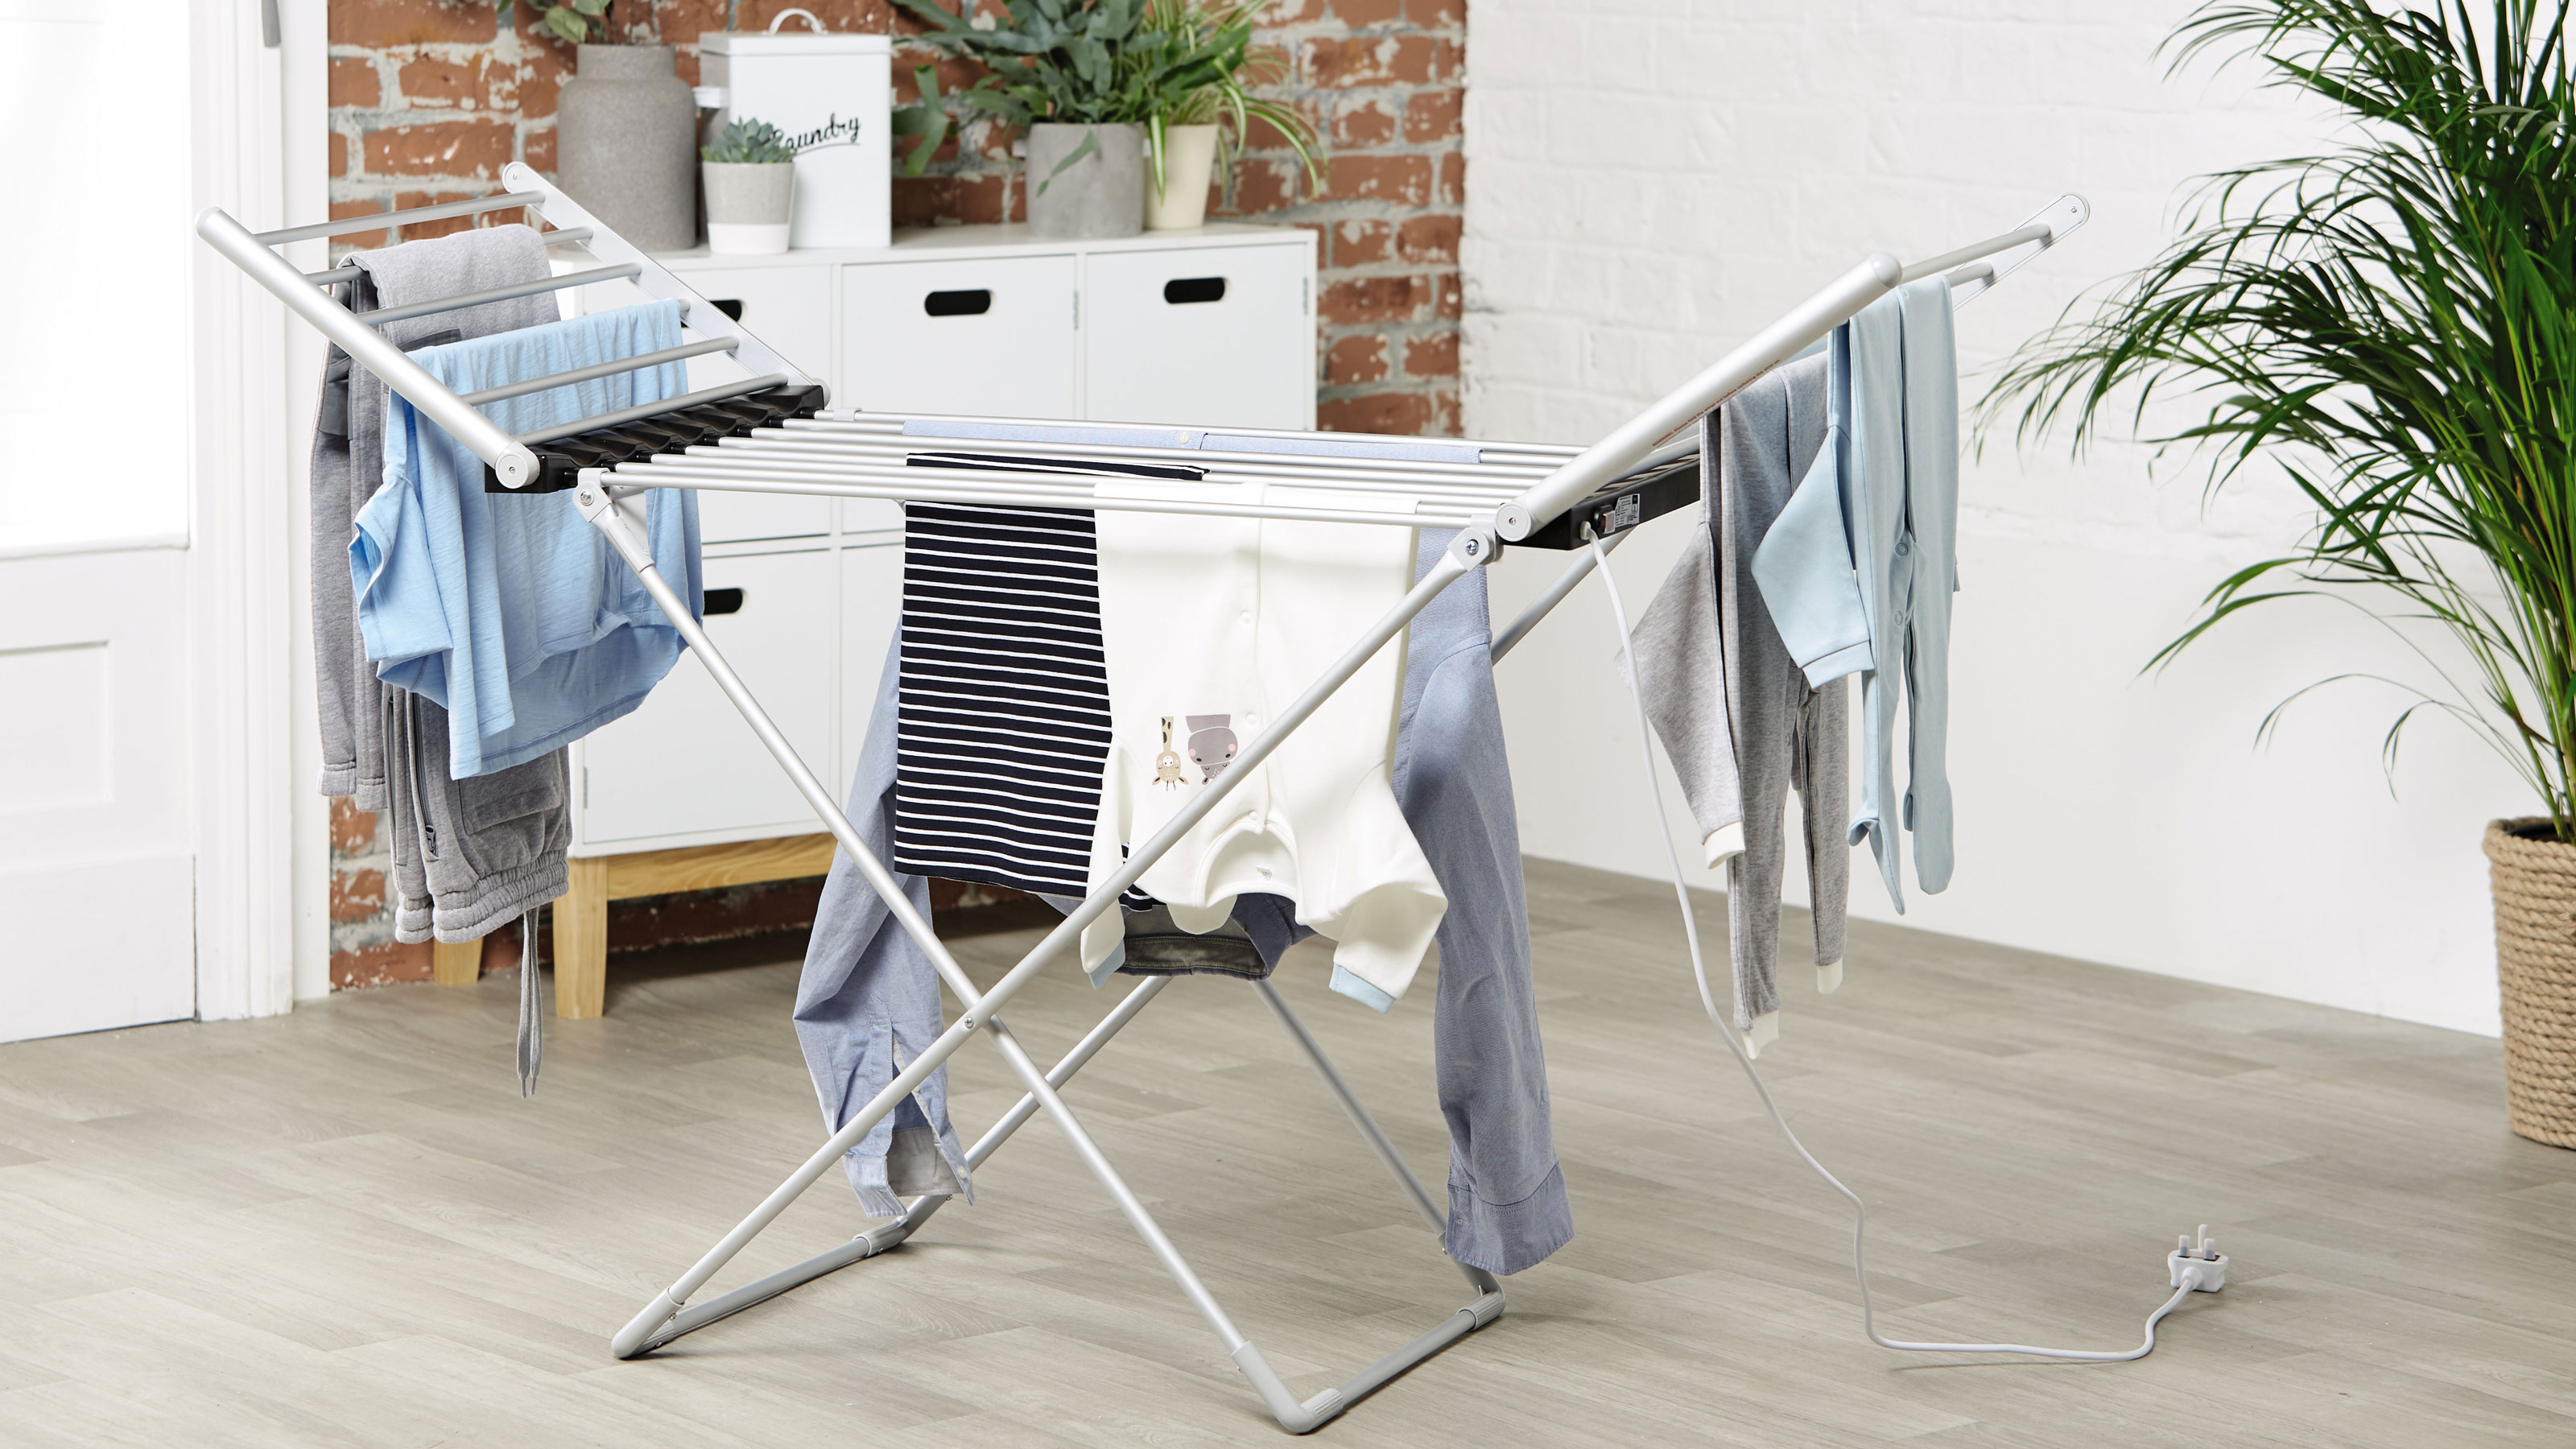 Heated clothes airer or tumble dryer: which is the better